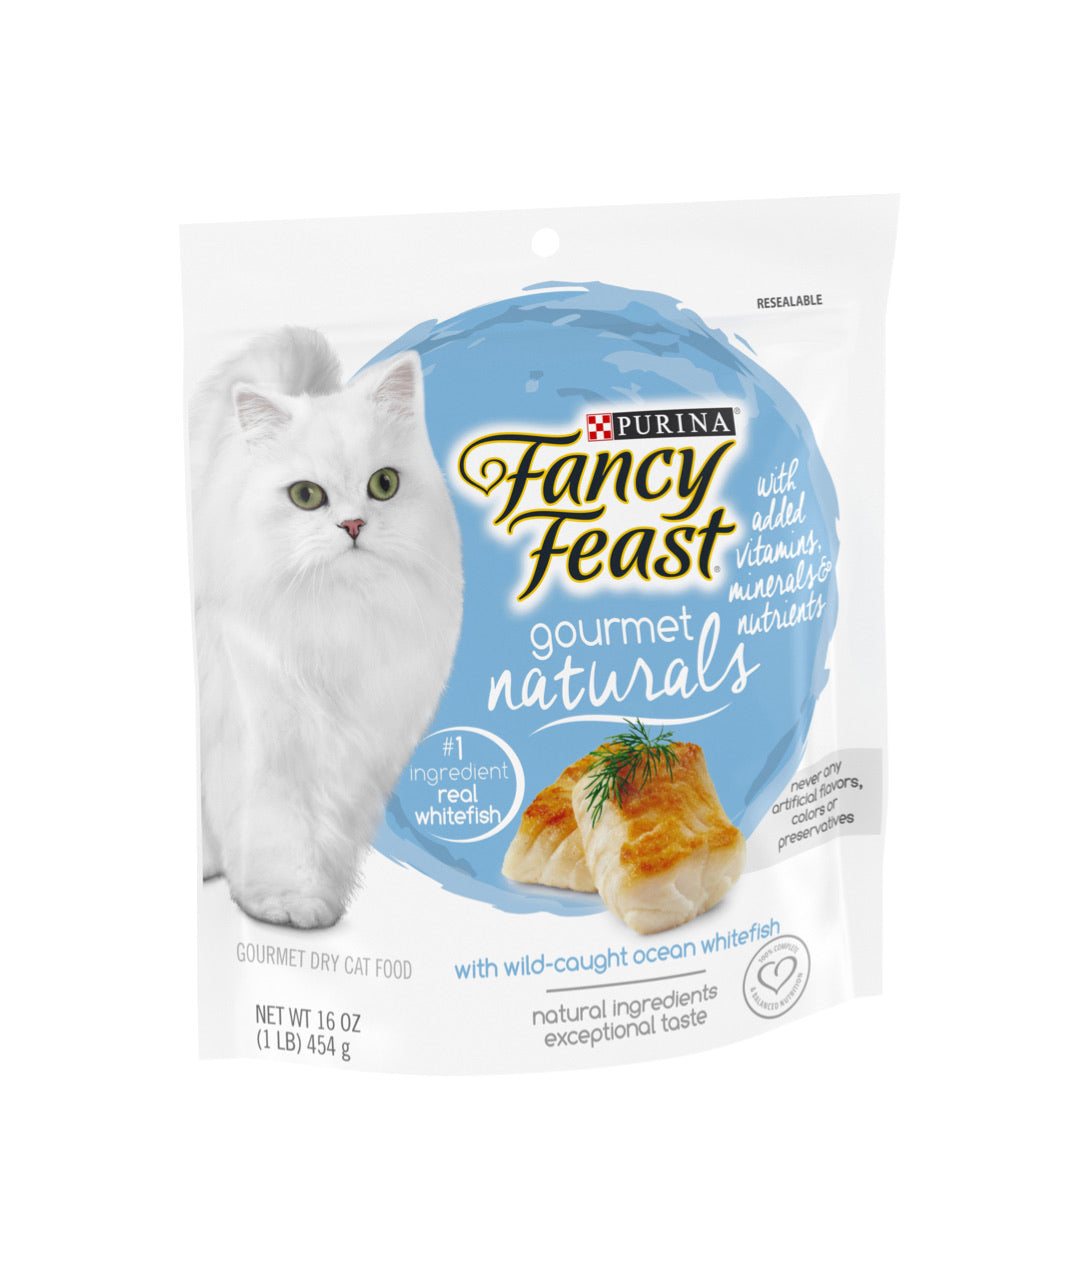 Fancy Feast Gourmet Naturals with Wild-Caught Ocean Whitefish (454g)